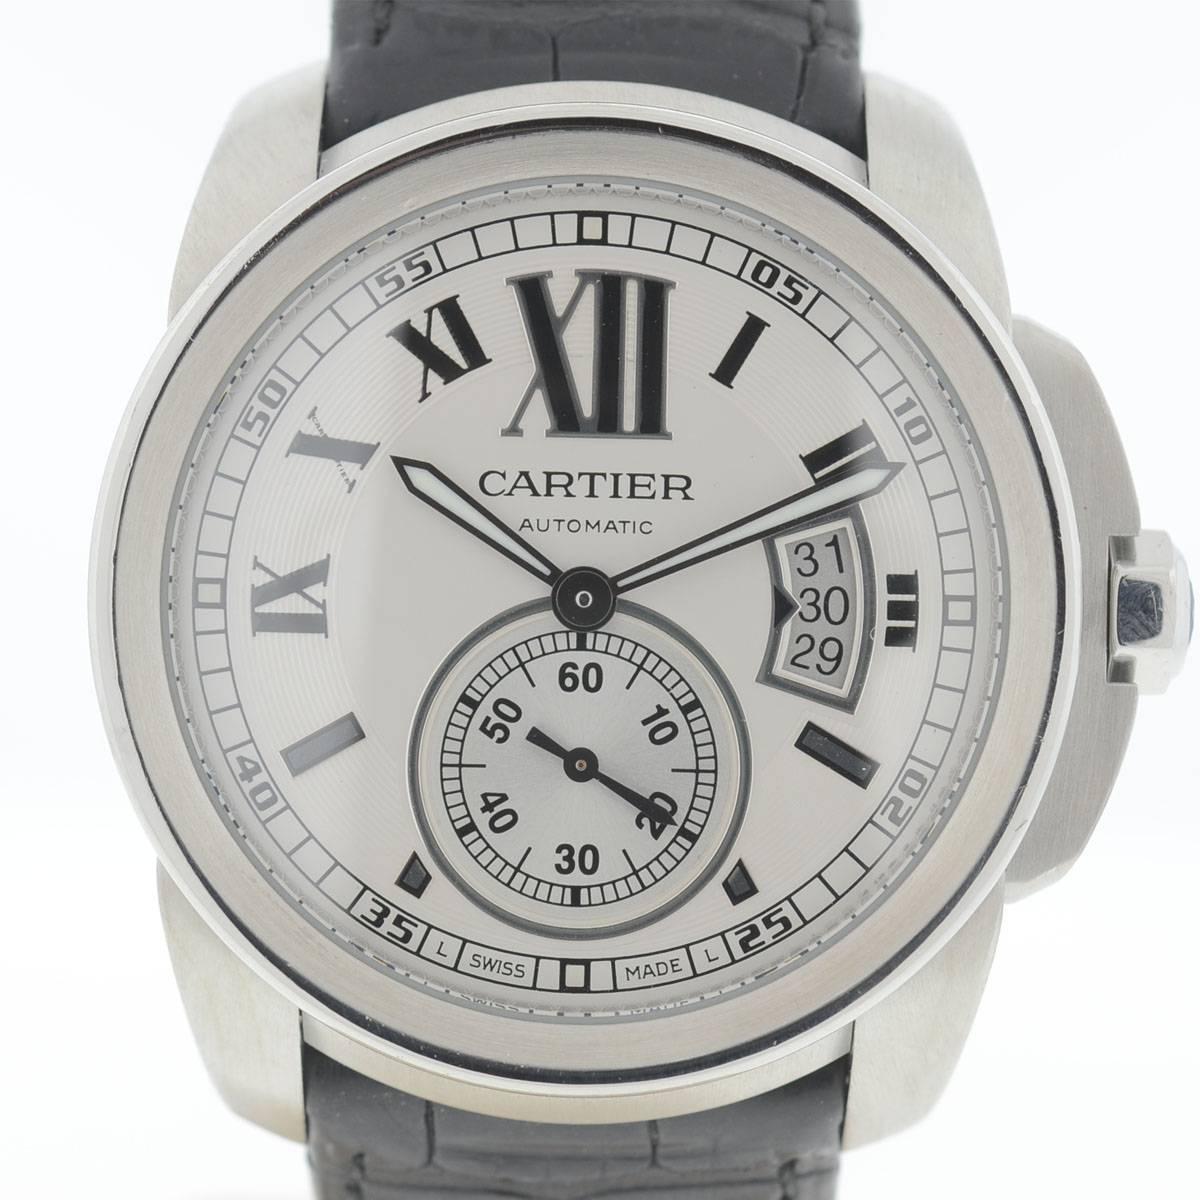 Company-Cartier
Style-Sport
Model-Calibre
Reference Number-W7100037
Case Metal-Stainless Steel
Case Measurement-42mm 
Bracelet-Fits 7'' will adjust up to 8''
Dial-Silvered
Bezel-Stainless Steel - Excellent condition 
Crystal-Scratch Sapphire